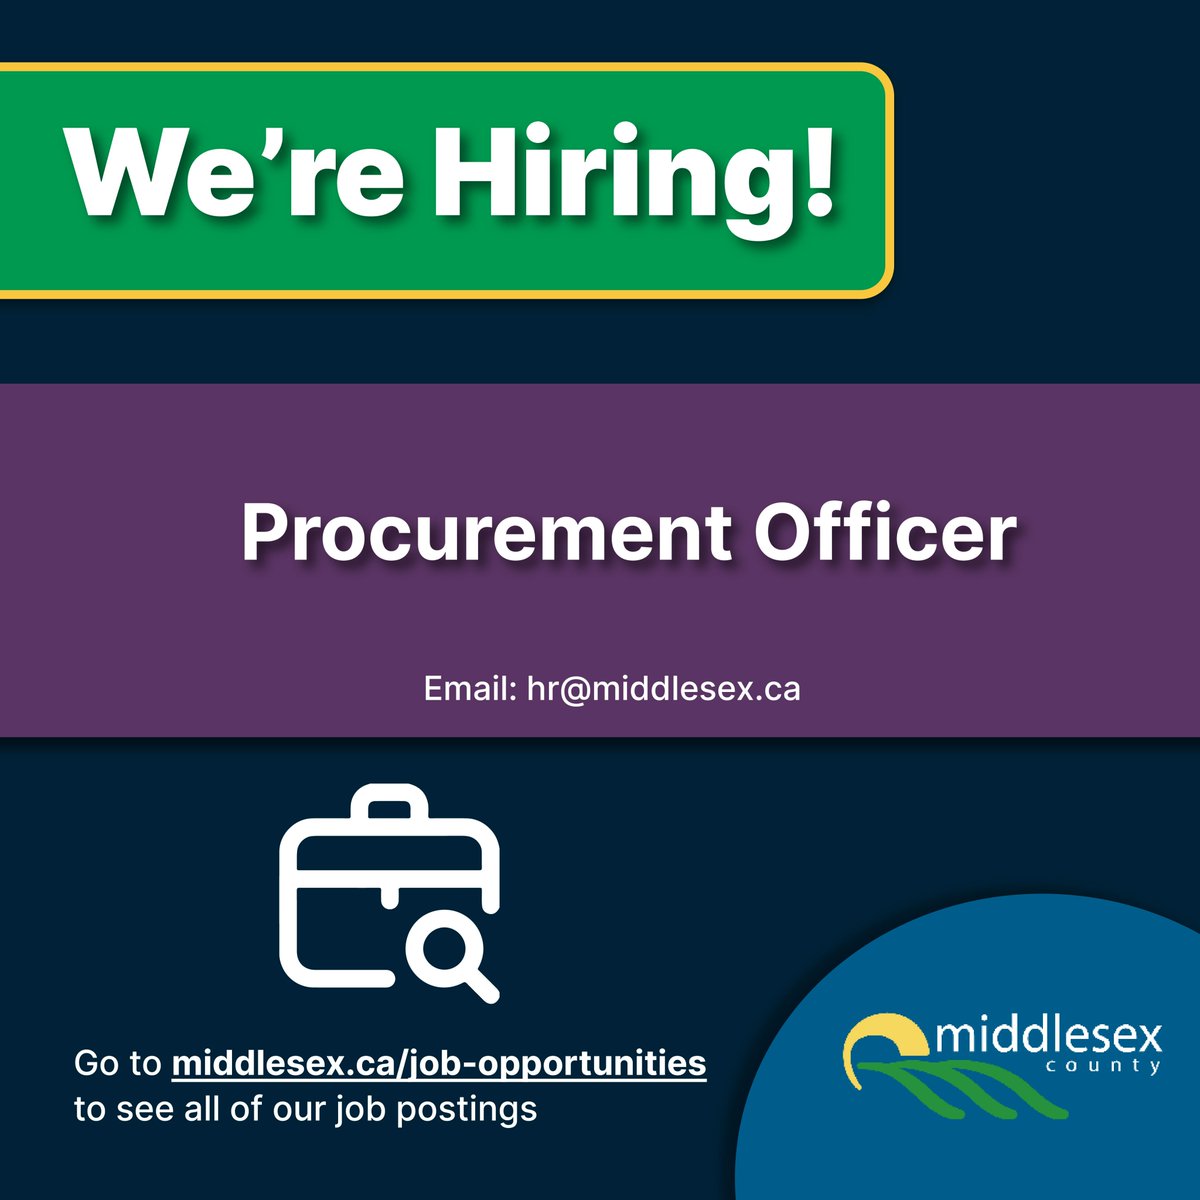 📍 Job Opportunity 📍 We're on the lookout for a skilled Procurement Officer to join the team. If you have a passion for procurement and want to make a difference in our community, this could be the opportunity for you. For more information go to ➡ bit.ly/3UaeAWX